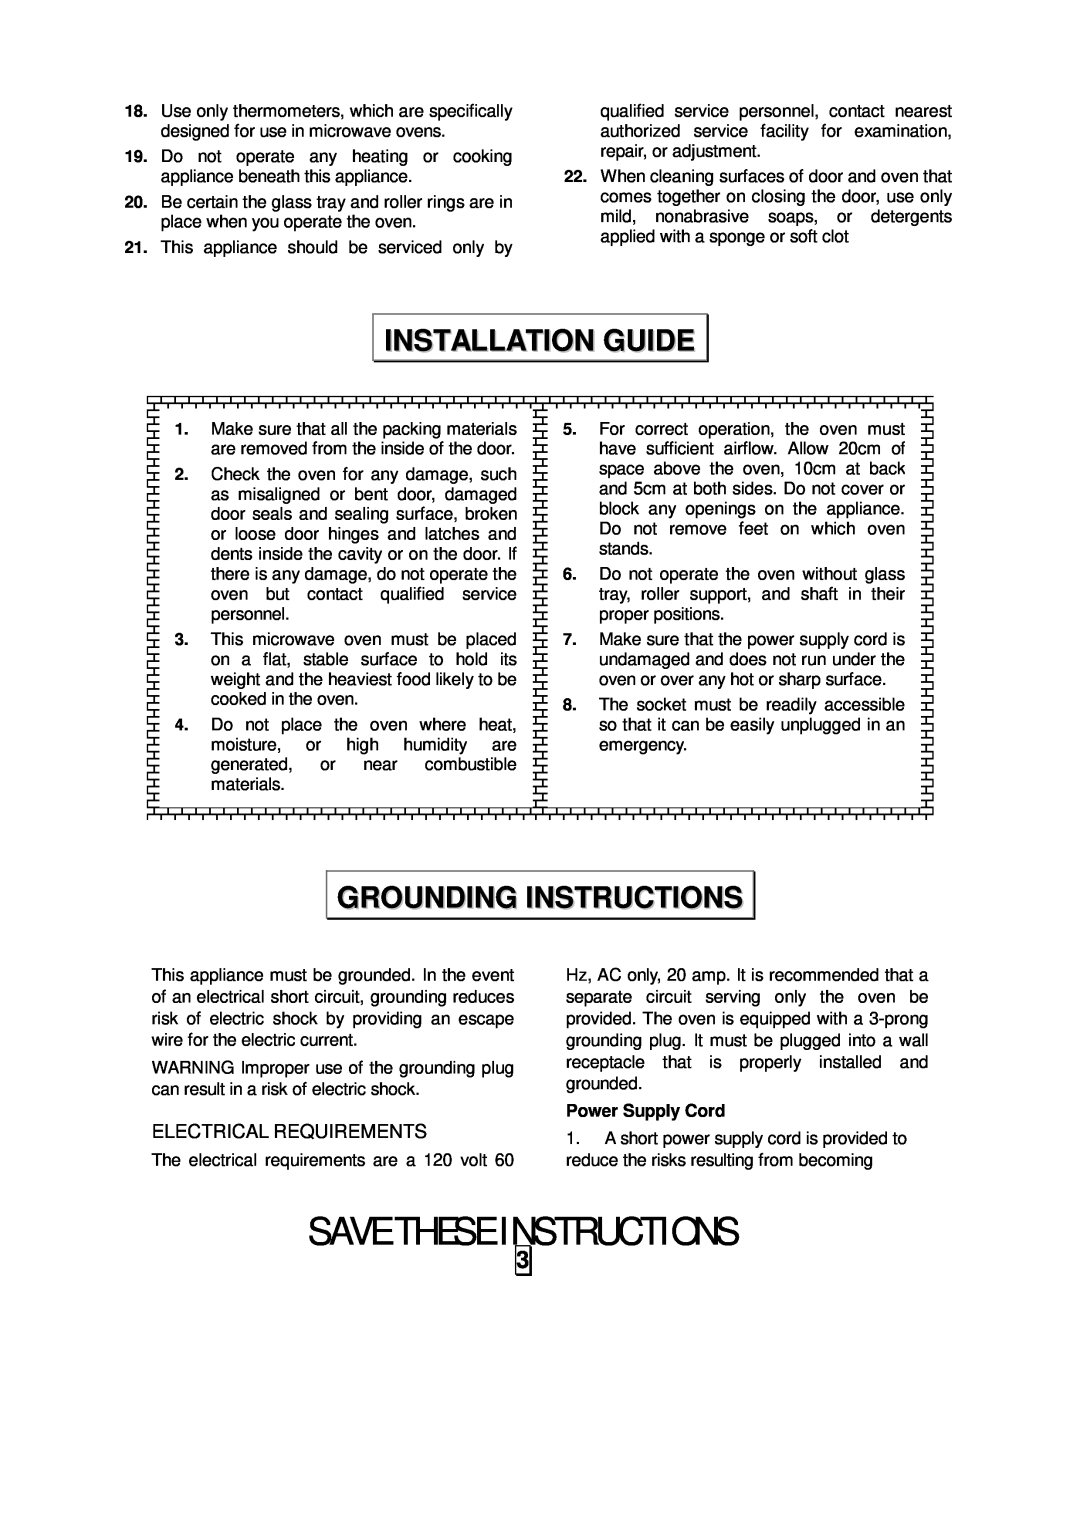 Sunbeam SMW992 owner manual Installation Guide, Grounding Instructions, Save These Instructions, Electrical Requirements 